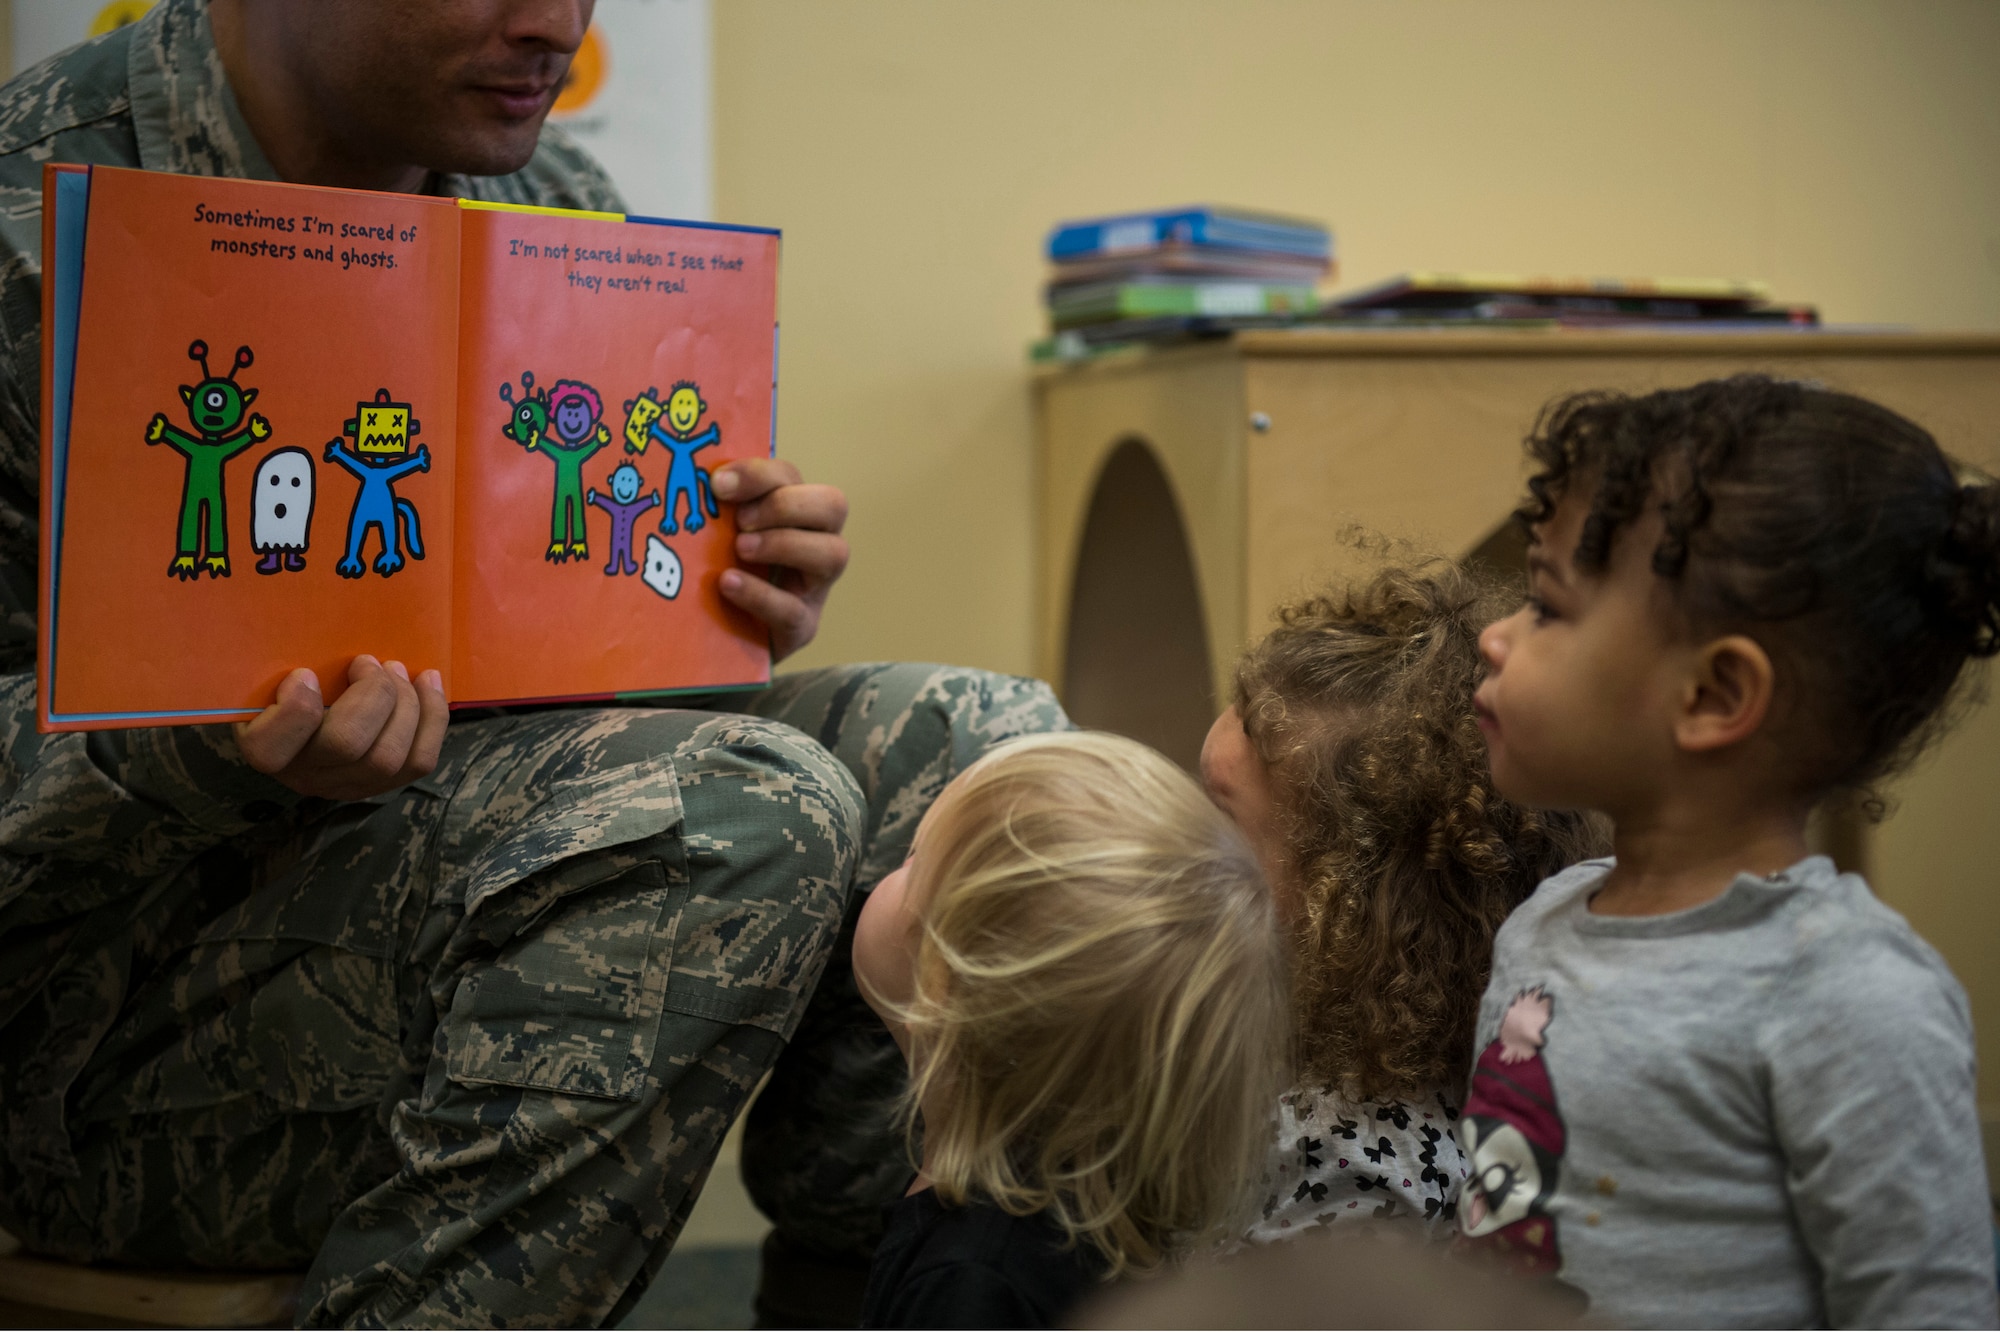 U.S. Air Force Master Sgt. Roberto Oregon, Pitsenbarger Airman Leadership School commandant, holds a book open during the third annual Dr. Martin Luther King Jr. ‘Reading Is A Civil Right’ reading drive at the Child Development Center on Spangdahlem Air Base, Germany, Jan. 14, 2016. More than 40 volunteers read to children from Jan. 13-15 to promote early literacy among children ahead of the holiday weekend. (U.S. Air Force photo by Airman 1st Class Luke Kitterman/Released) 